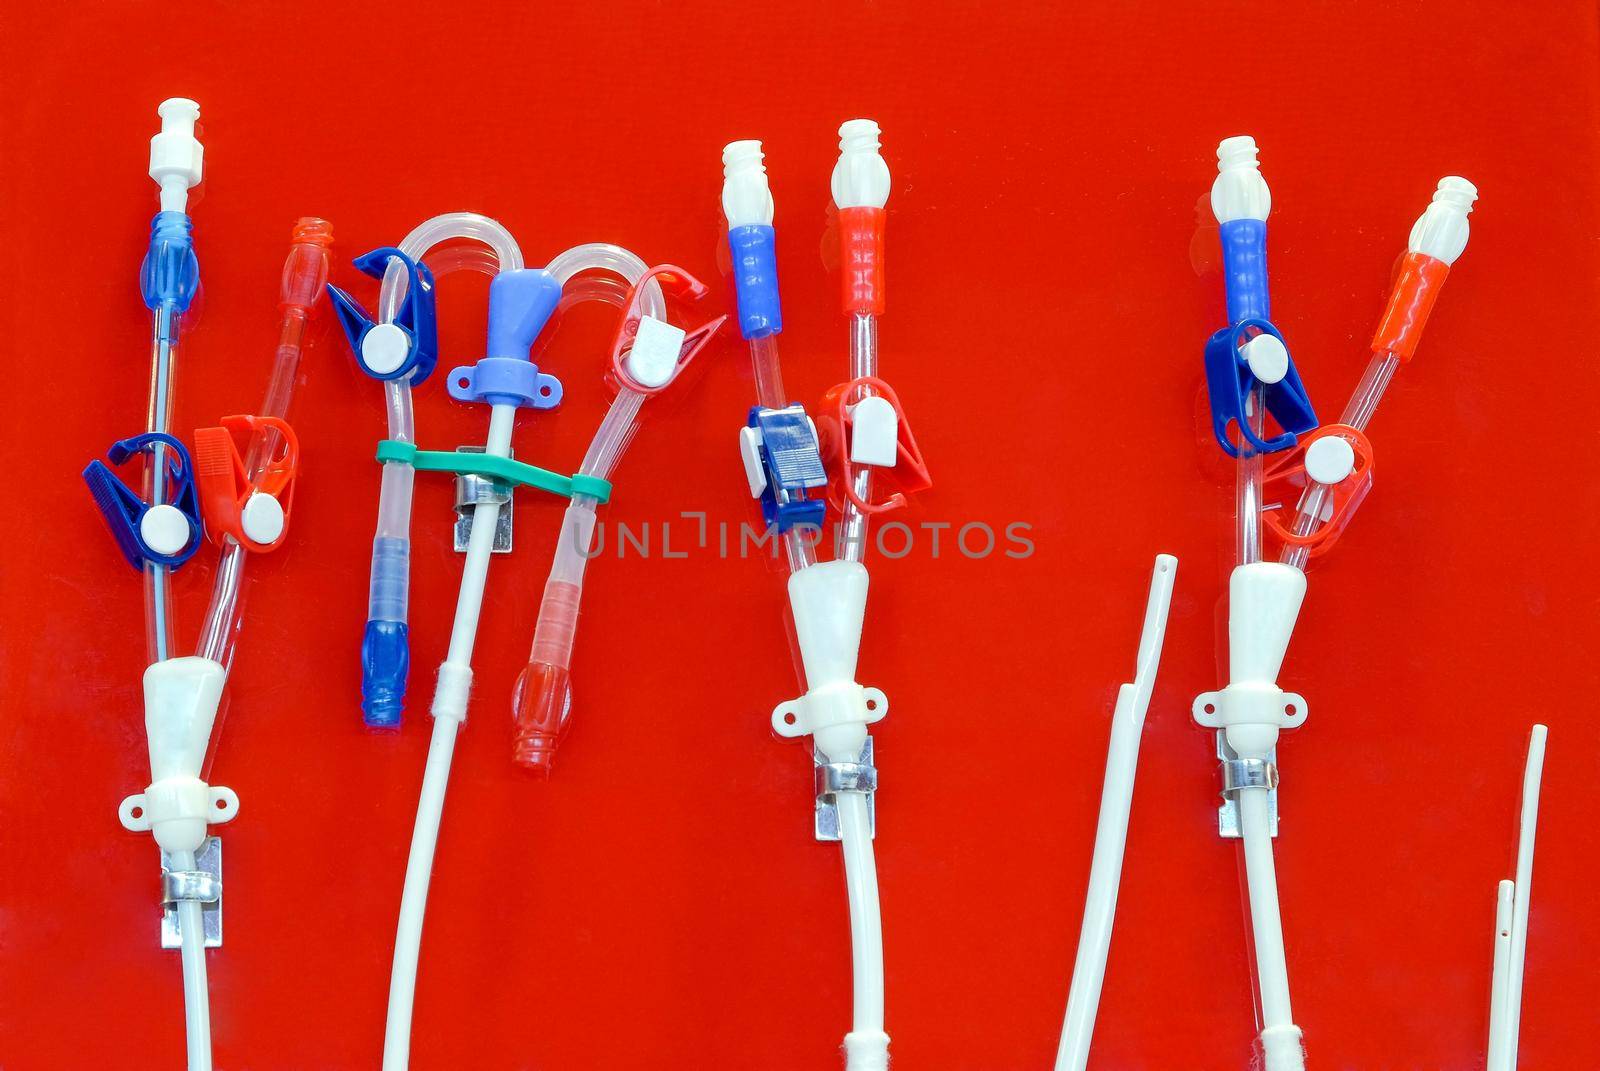 Tubes and hoses for use in bypass to patients with fatty stasis in the arteries. To make blood flow to the blood vessels and heart is normal, on red plastic sheet background